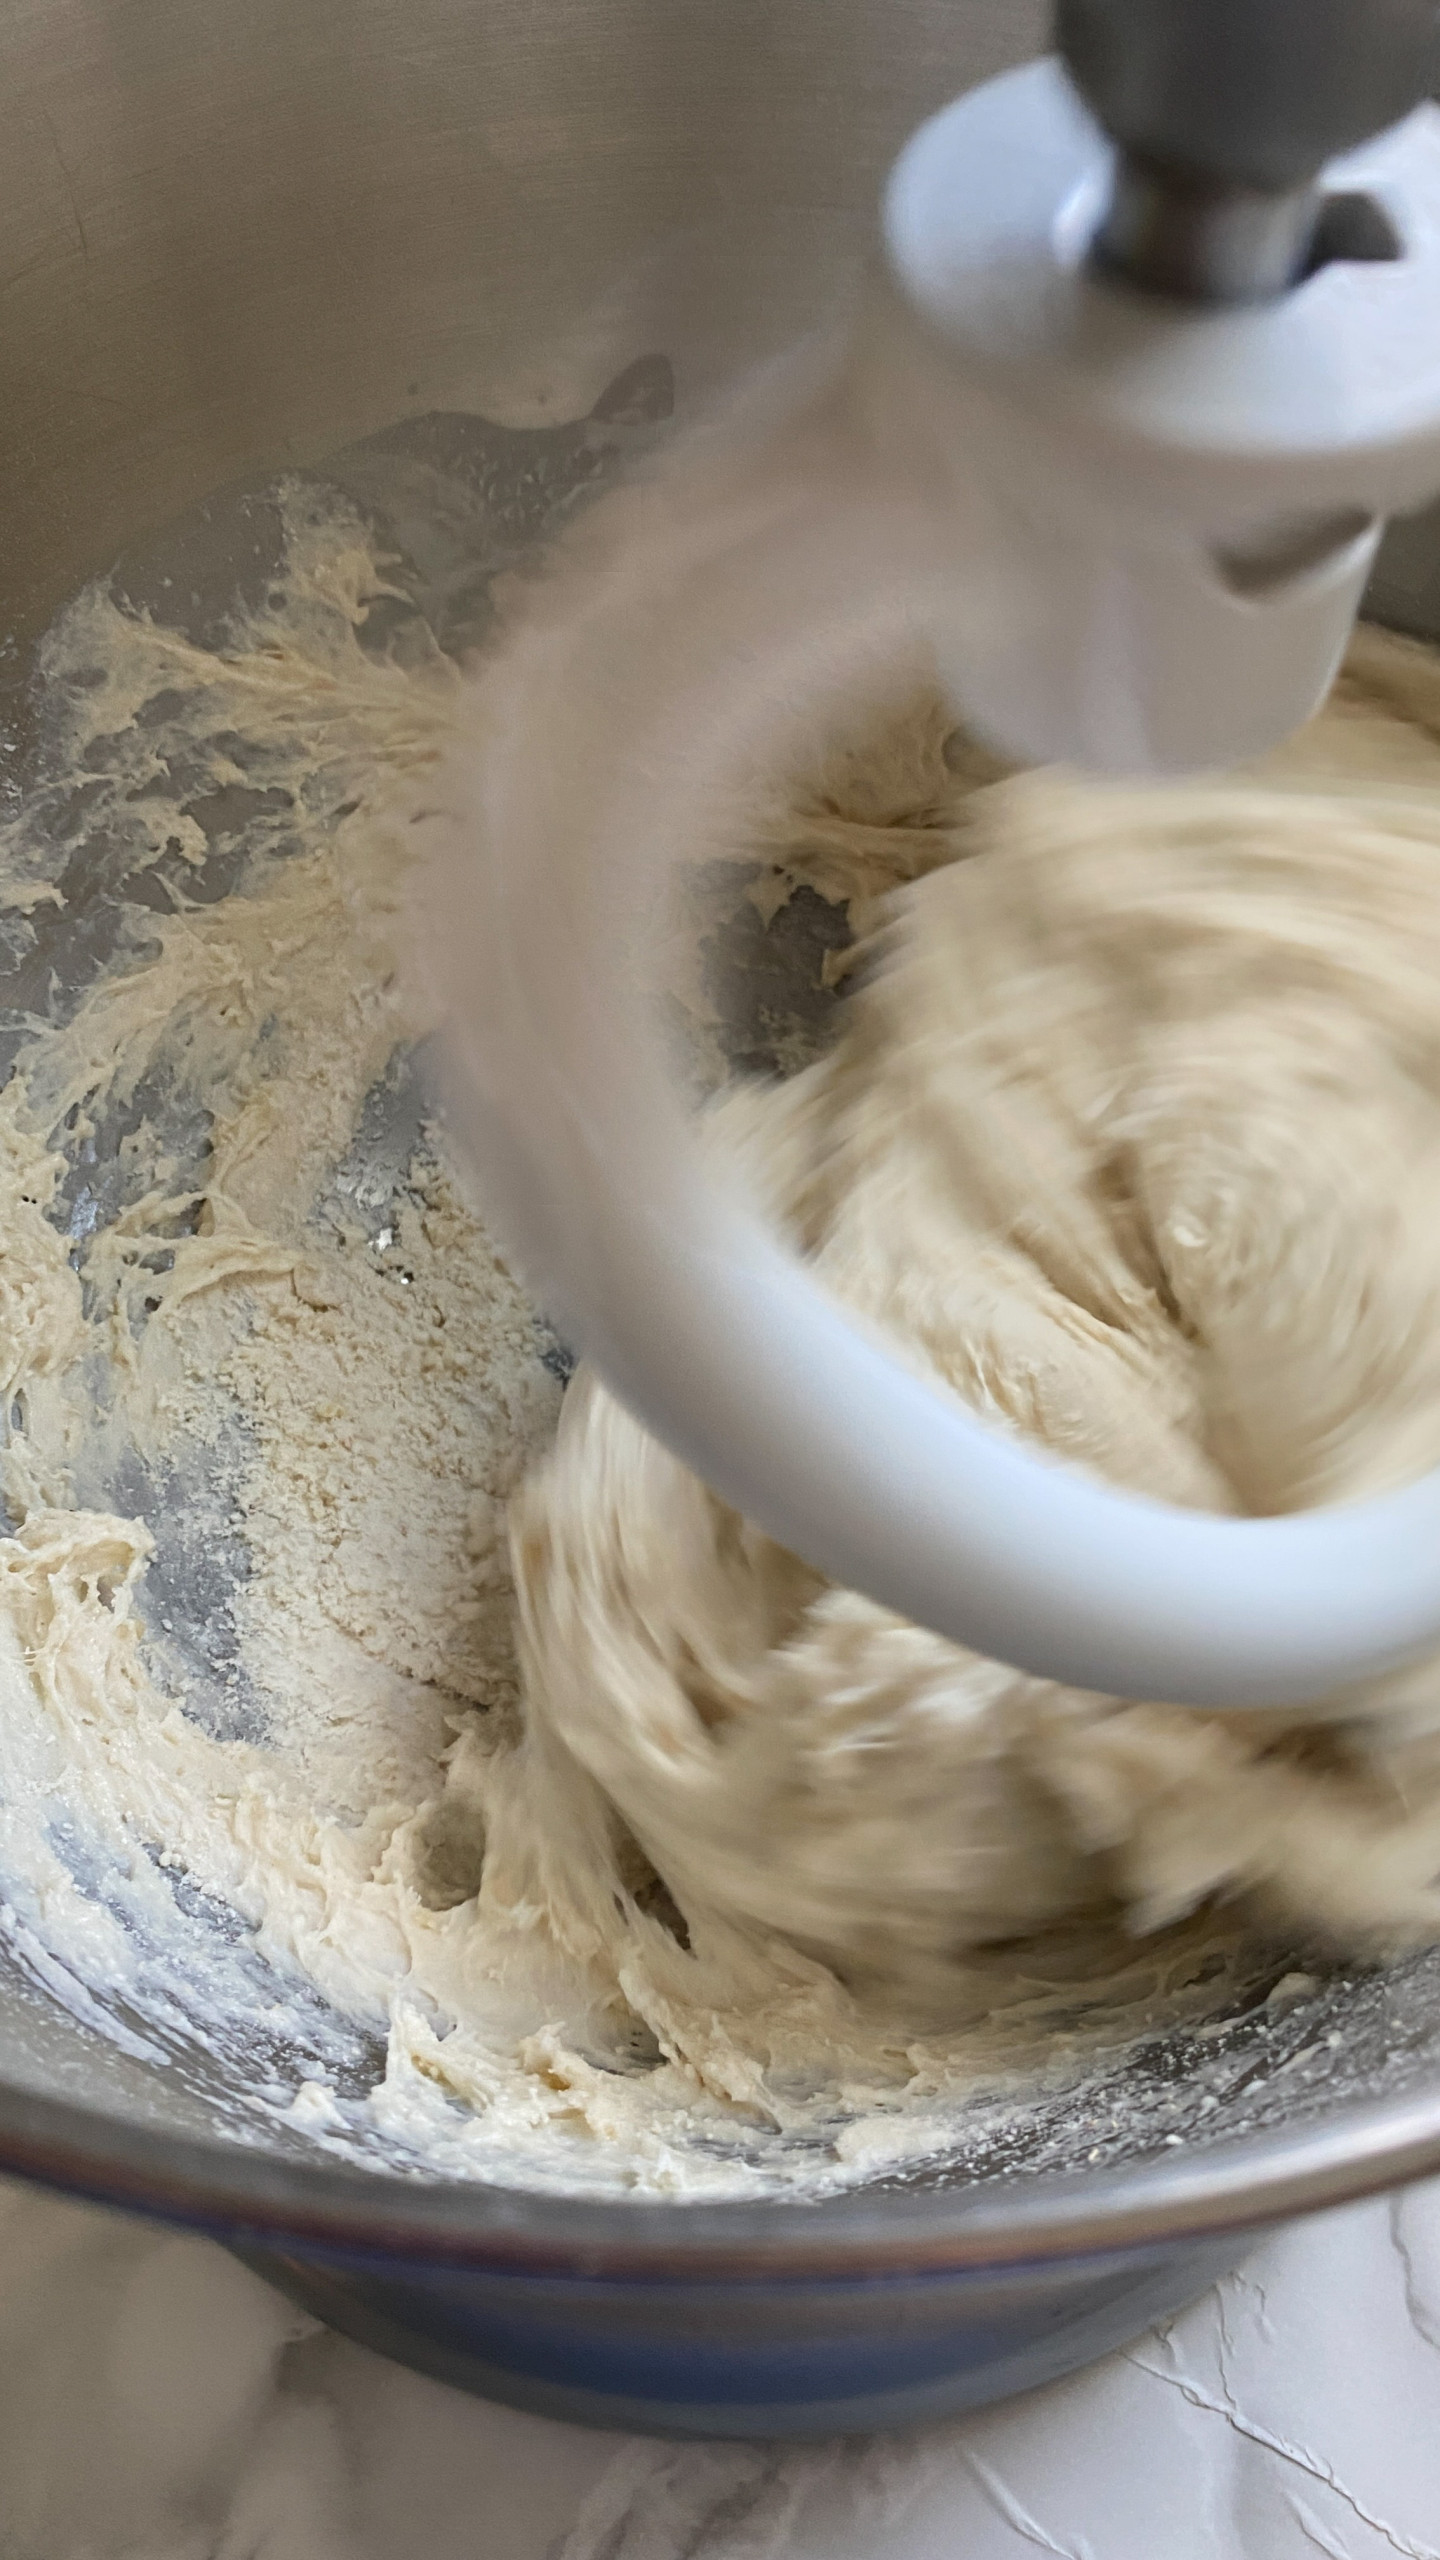 Mixing pizza dough in a stand mixer with a dough hook.